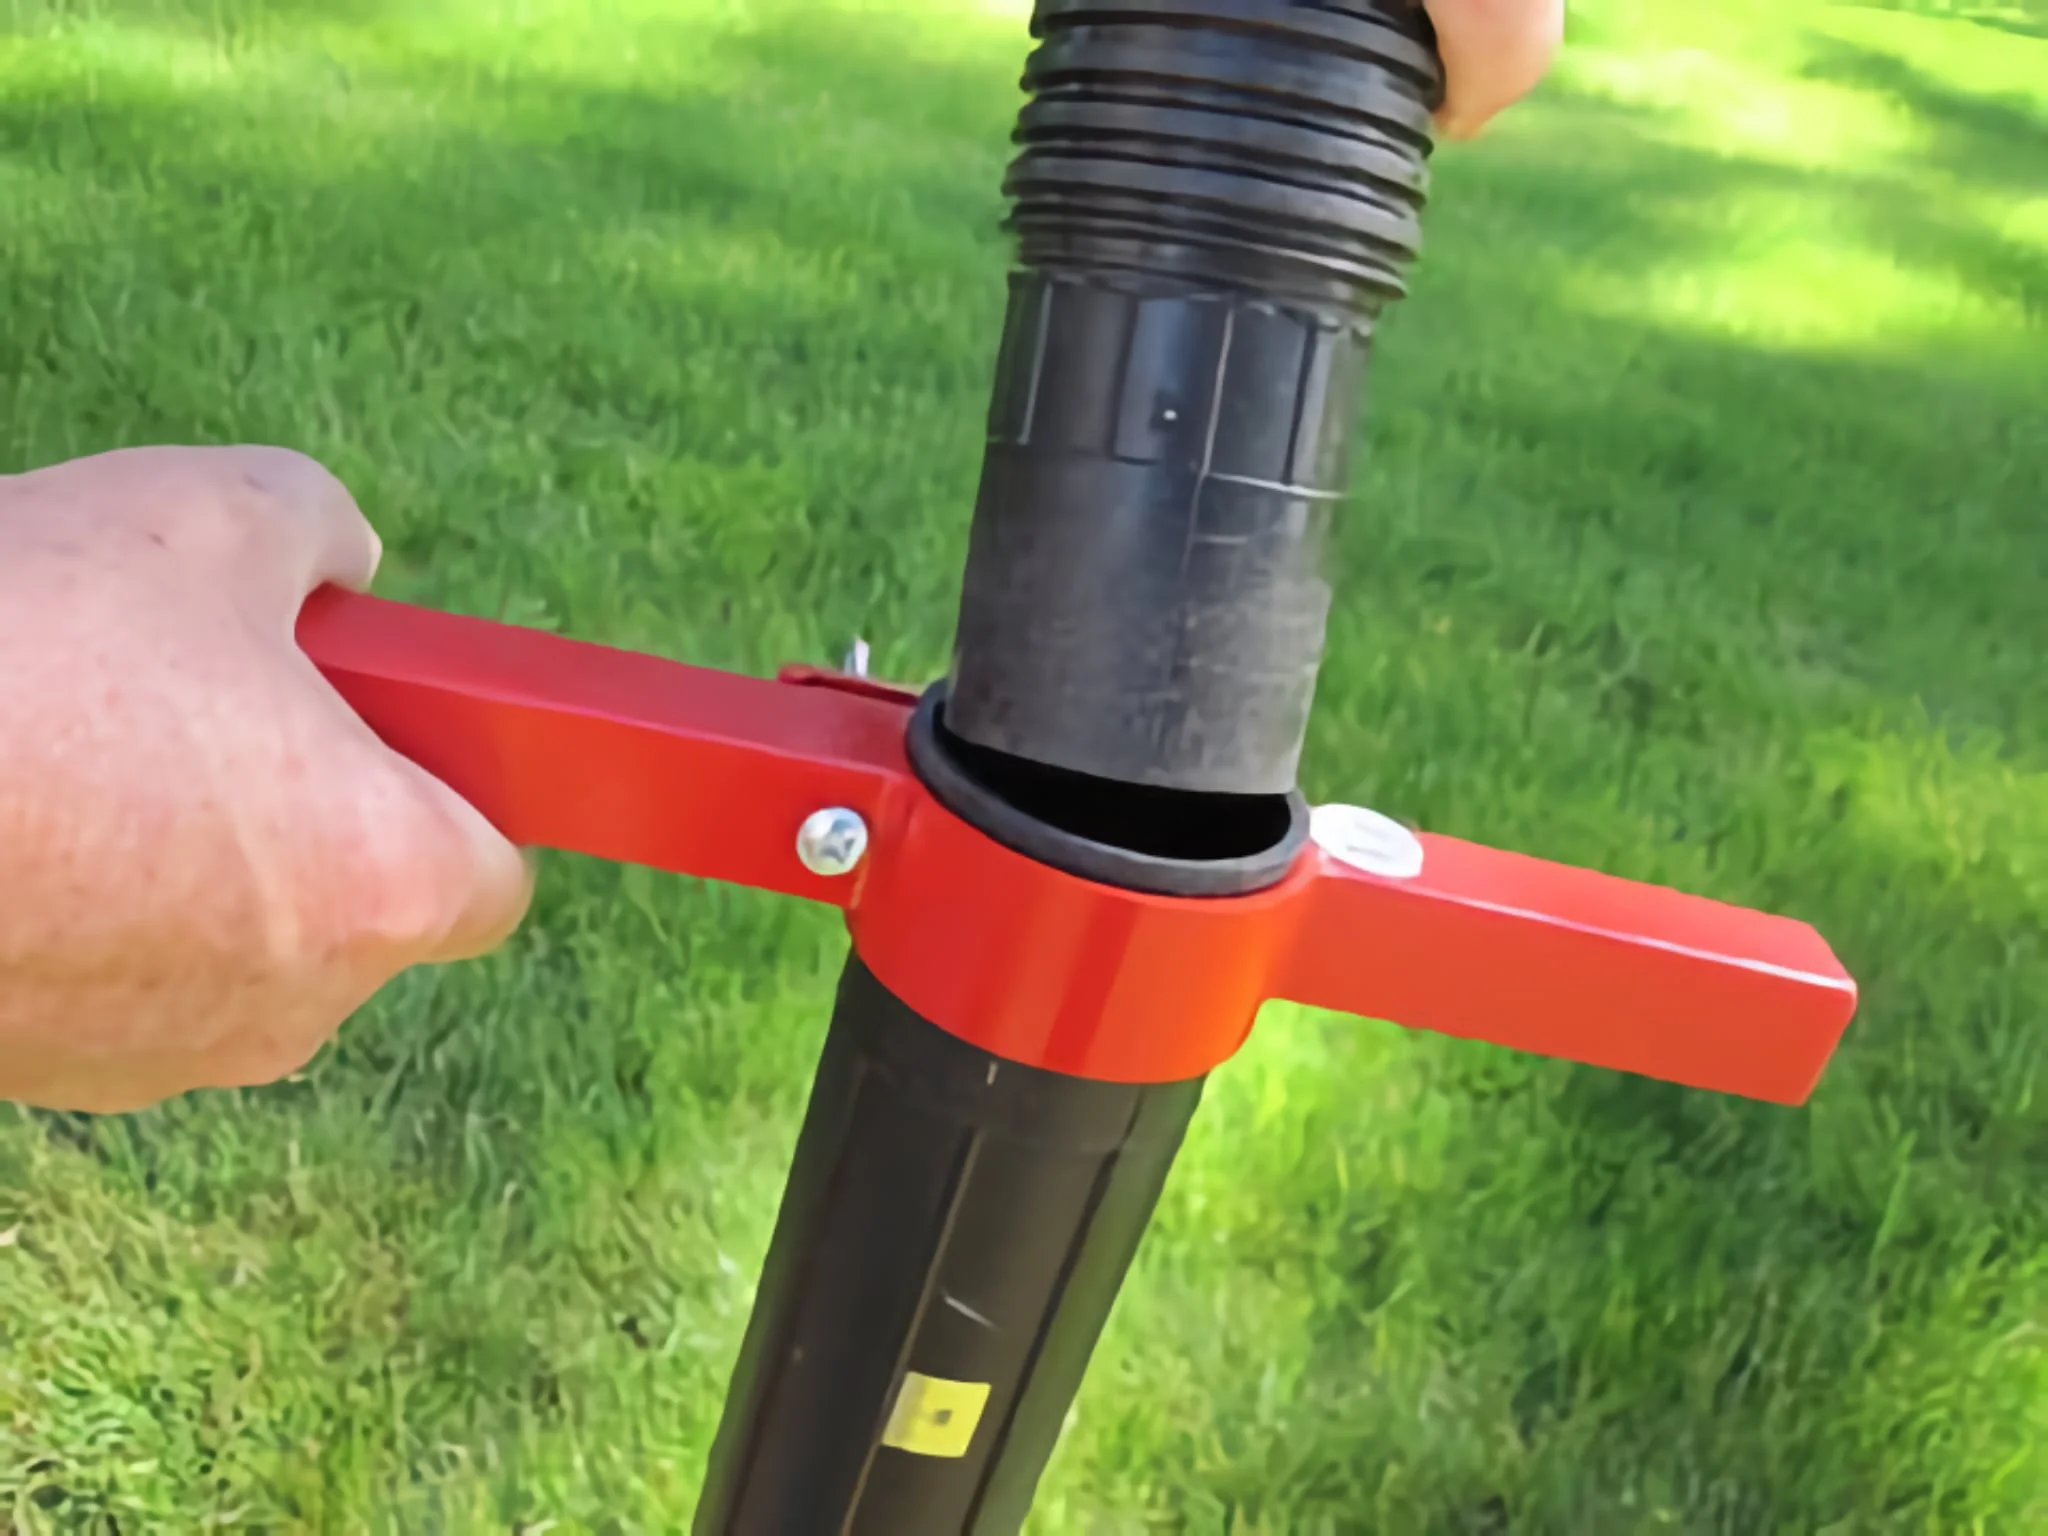 Connecting the shop vac to the HOLEVAC handle